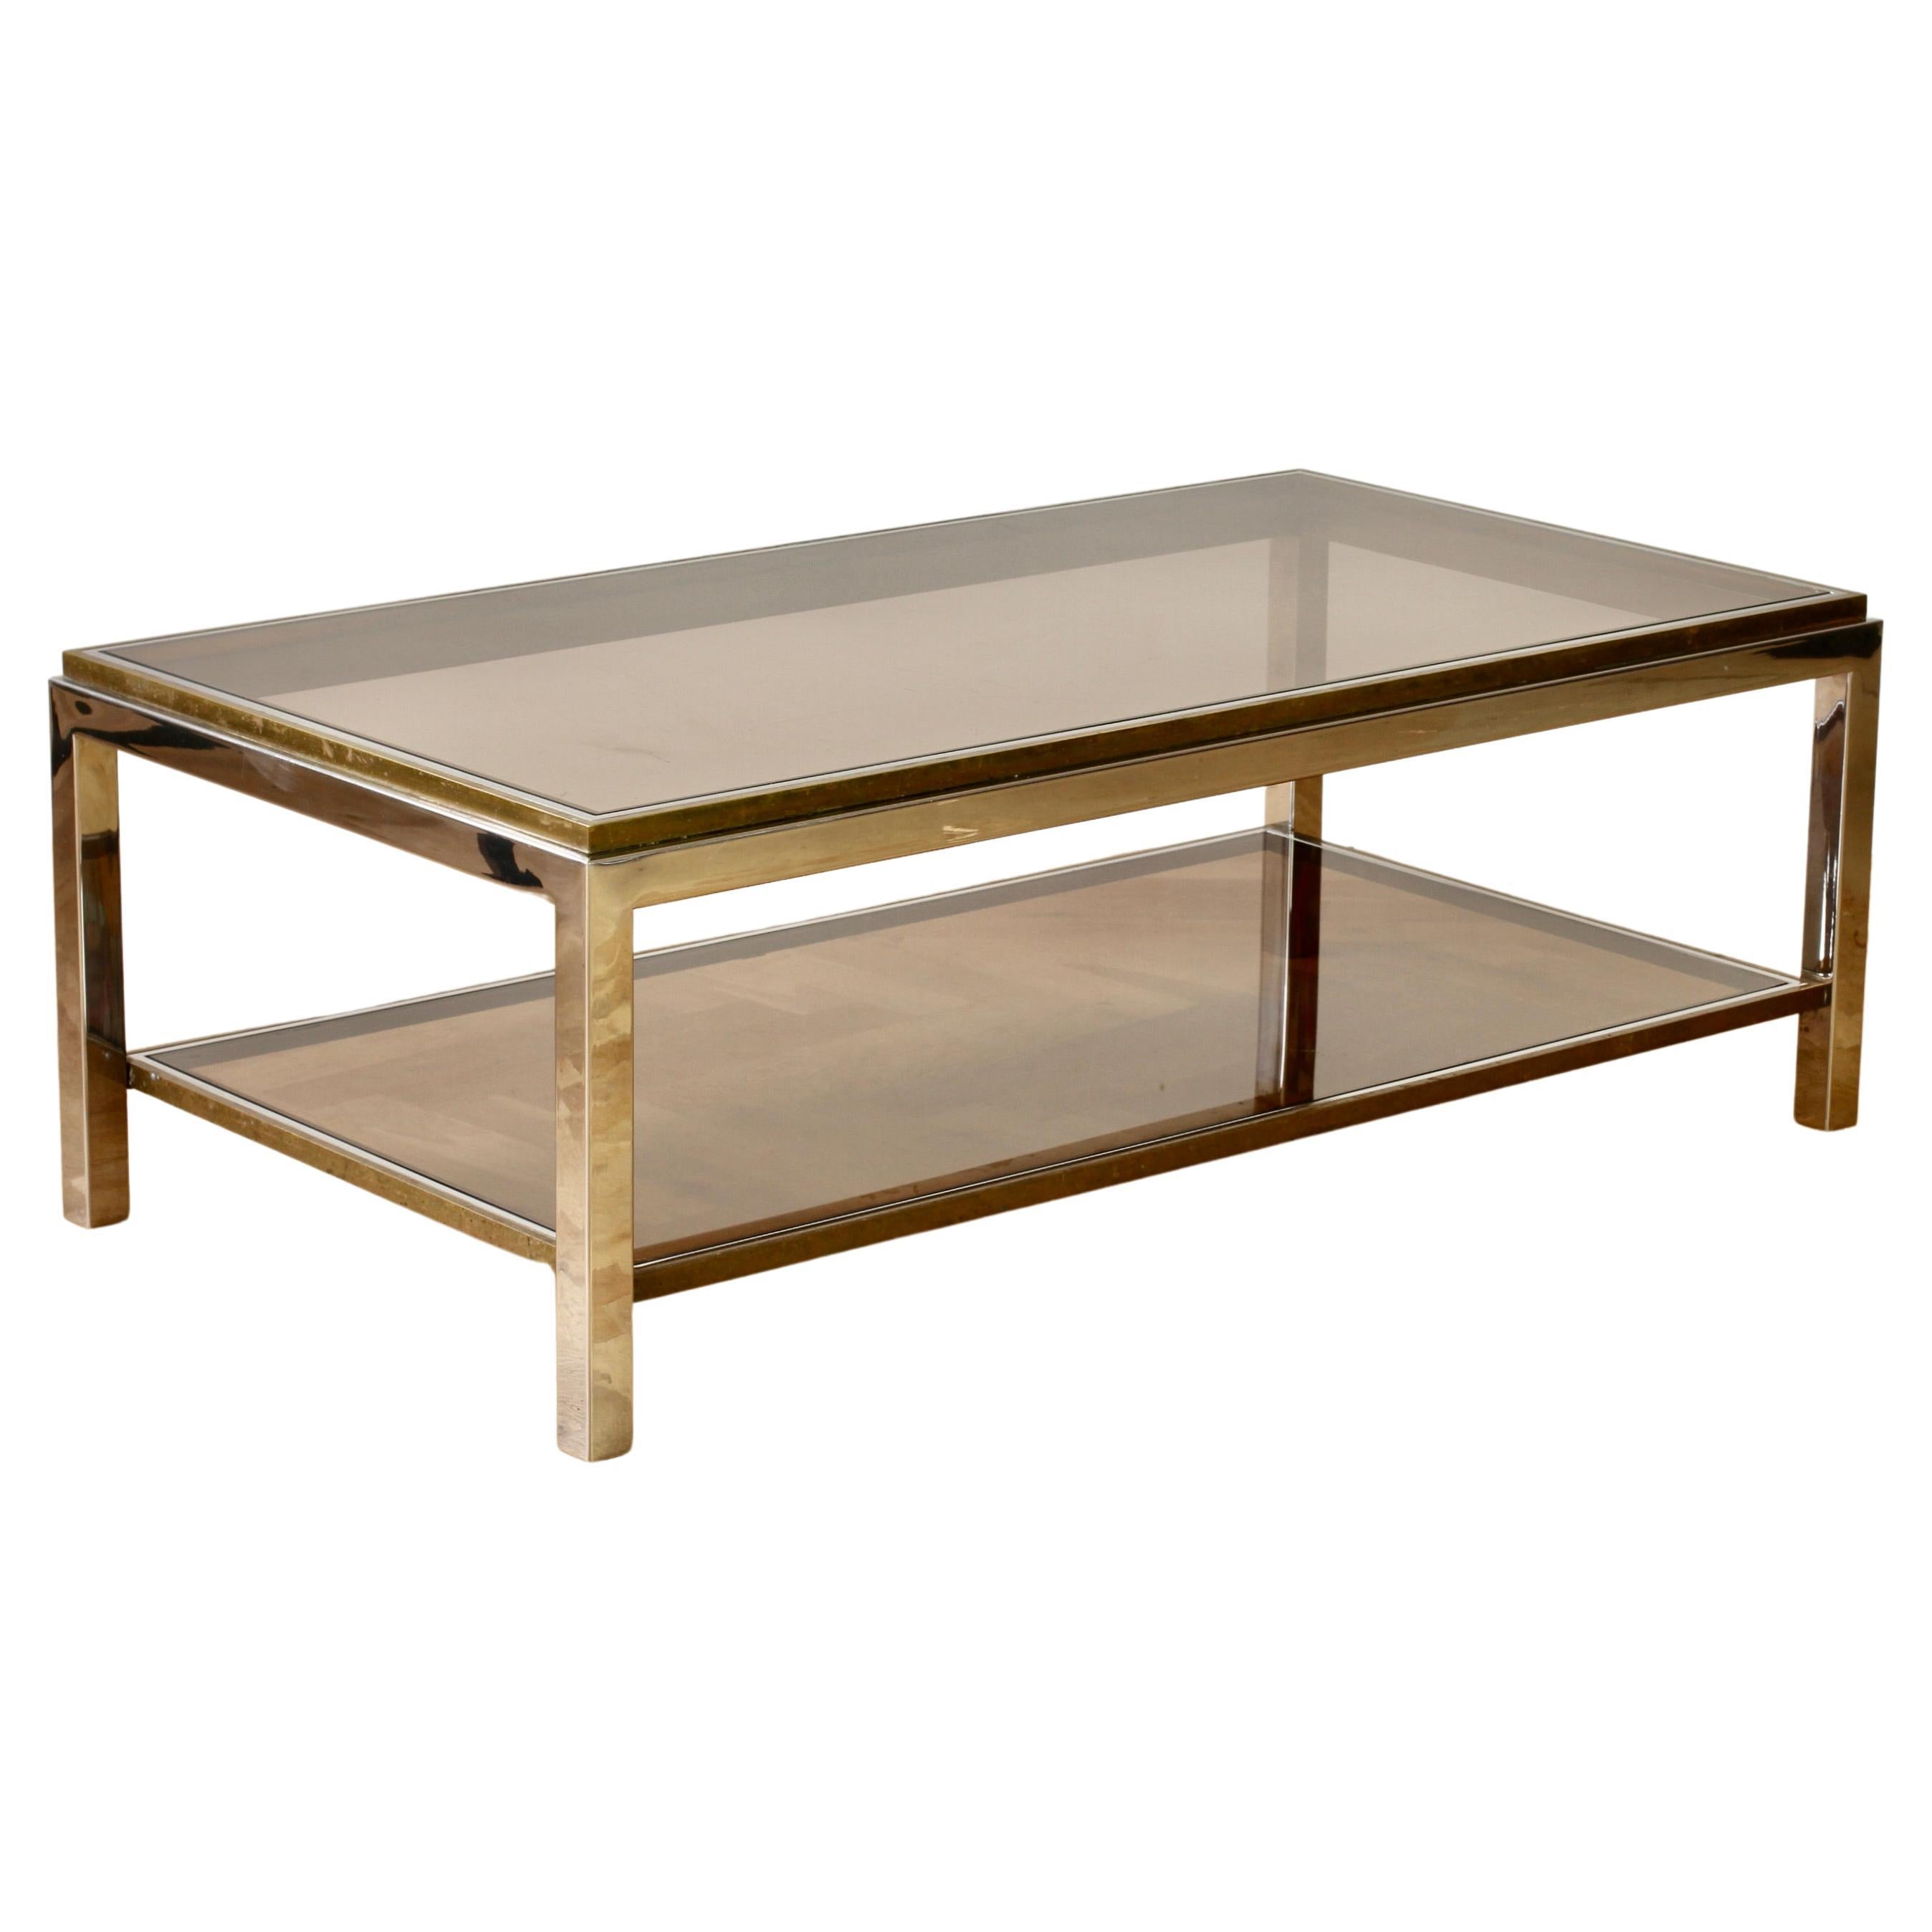 Willy Rizzo 'Flaminia' style two tiered double shelved patinated brass and chrome-plated vintage midcentury rectangular coffee or centre table, circa 1970s. Perfect for the Hollywood Regency style enthusiast or midcentury lover although, this table